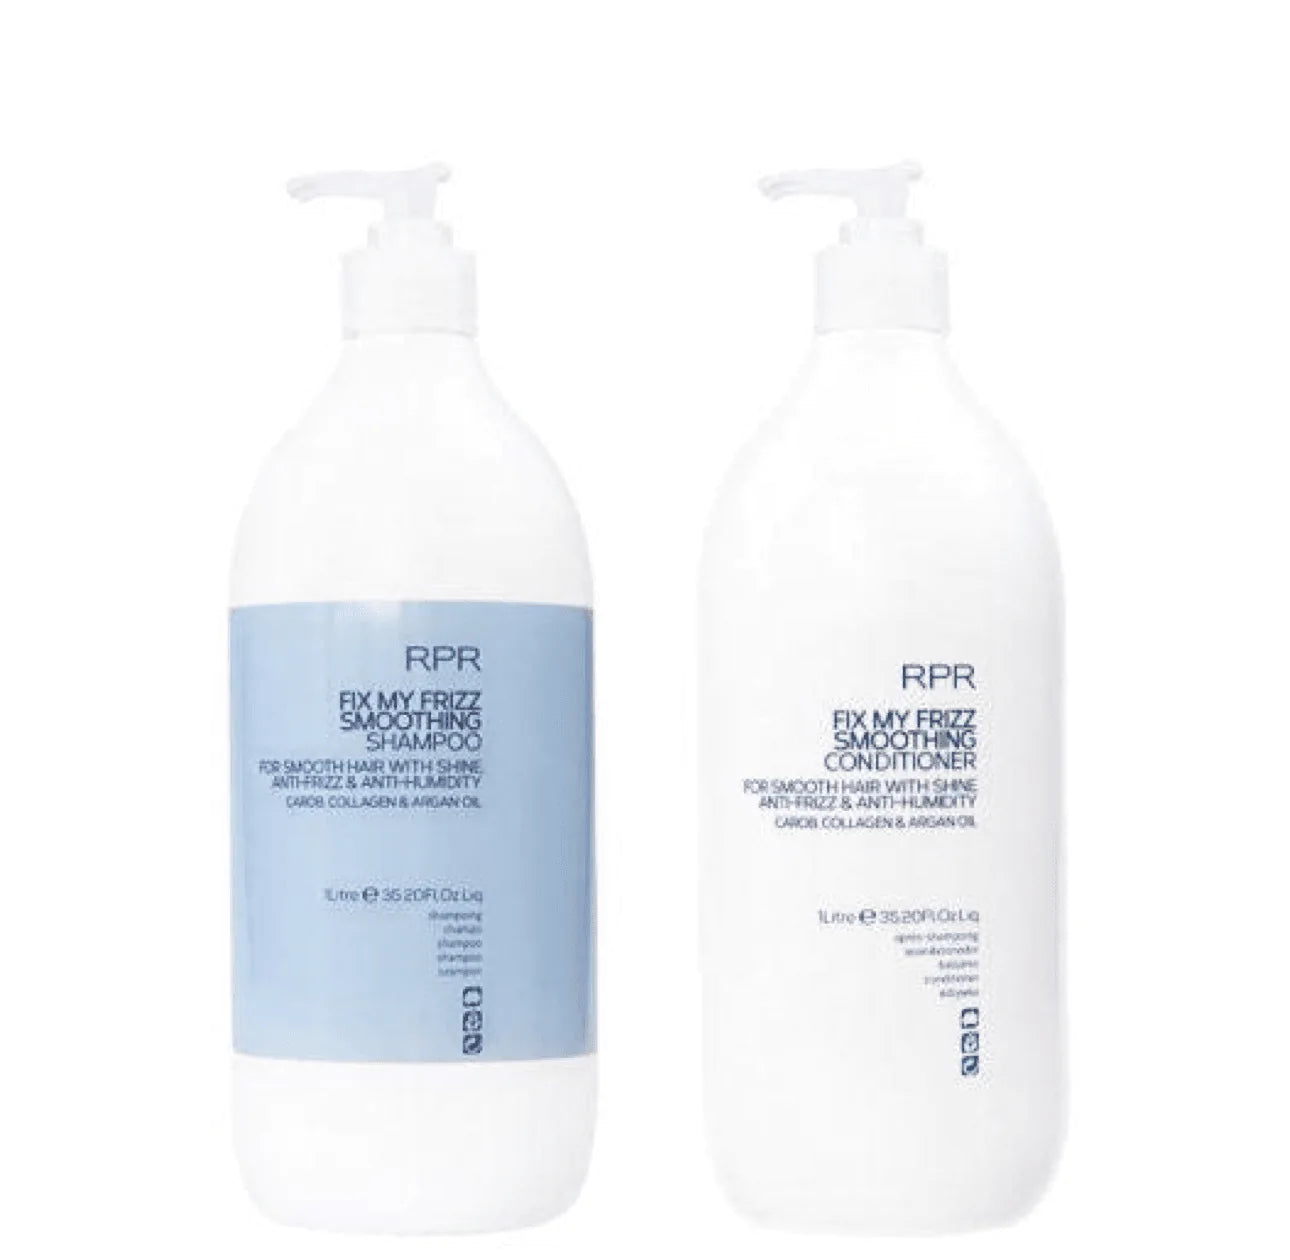 RPR Fix My Frizz Smoothing Shampoo & Conditioner Duo Set 1L - Salon Warehouse